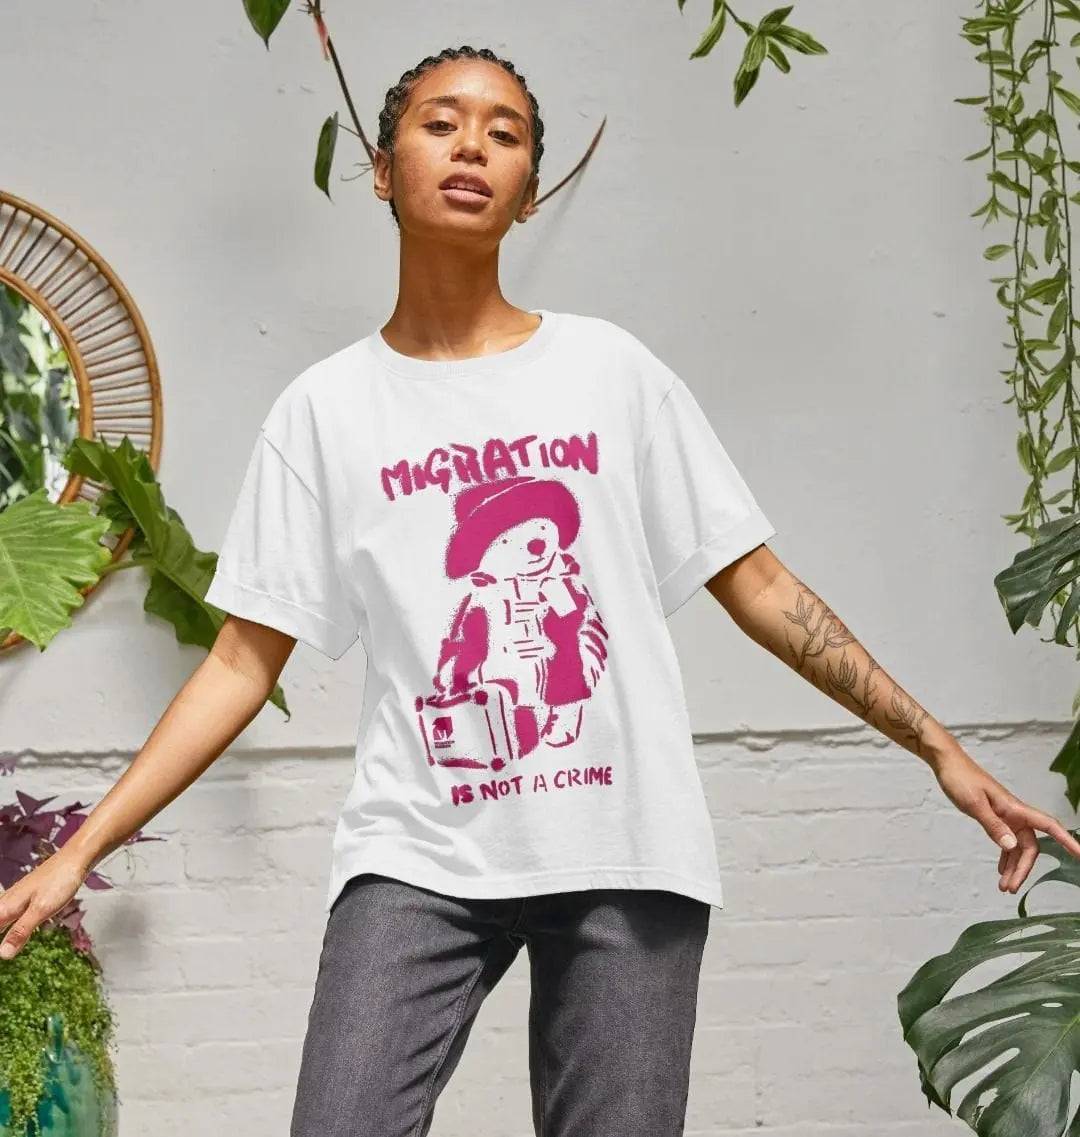 Migration Is Not A Crime - Organic Cotton Women's White Relaxed Fit T-shirt - Migration Museum Shop